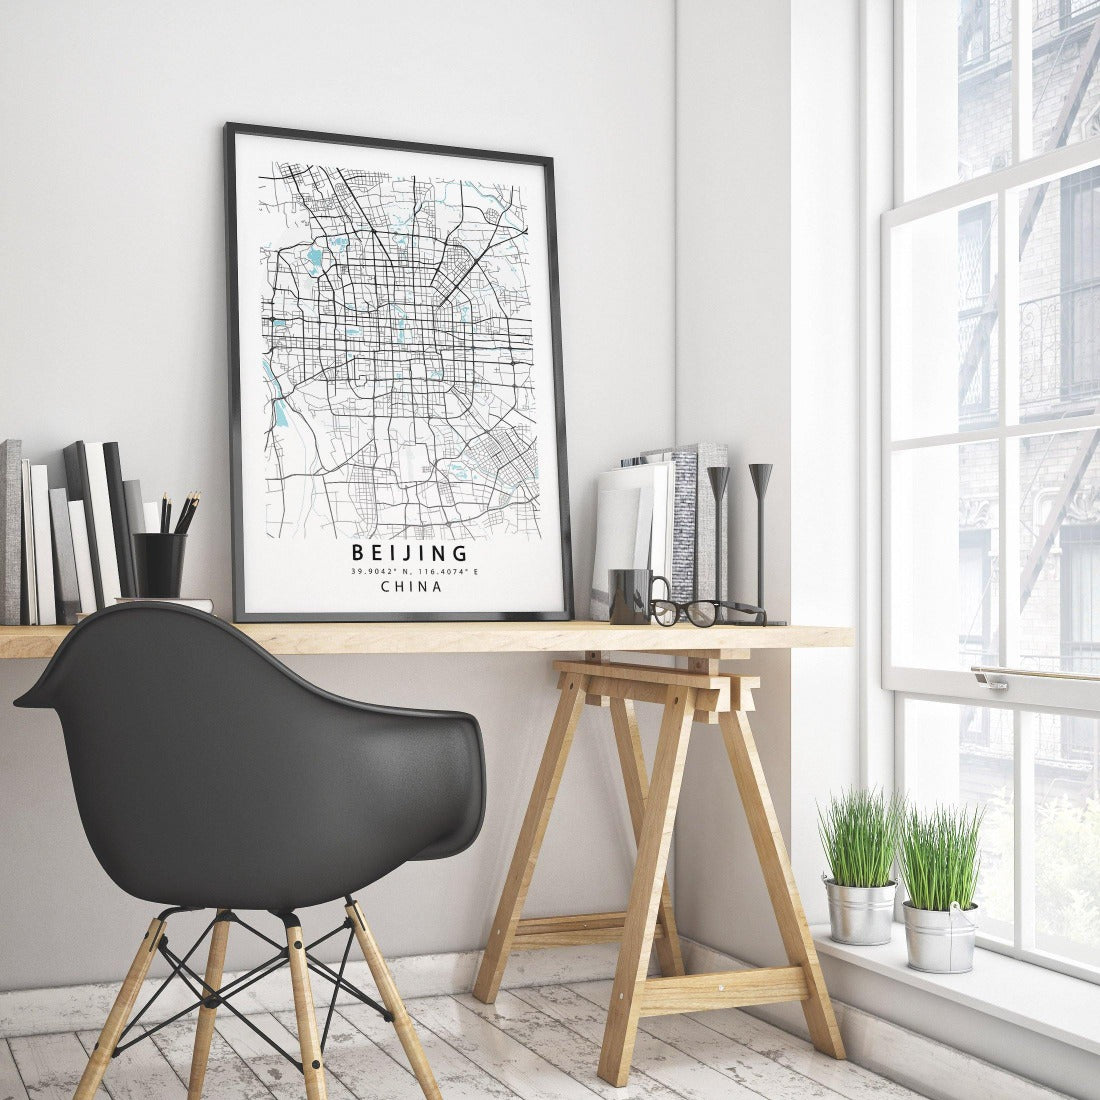 This stylish print is the perfect addition to any home or office. The Beijing City Map print from 98Types Maps is a great way to show your love of Asia and its many beautiful cities. This intricate map is sure to please anyone who sees it.